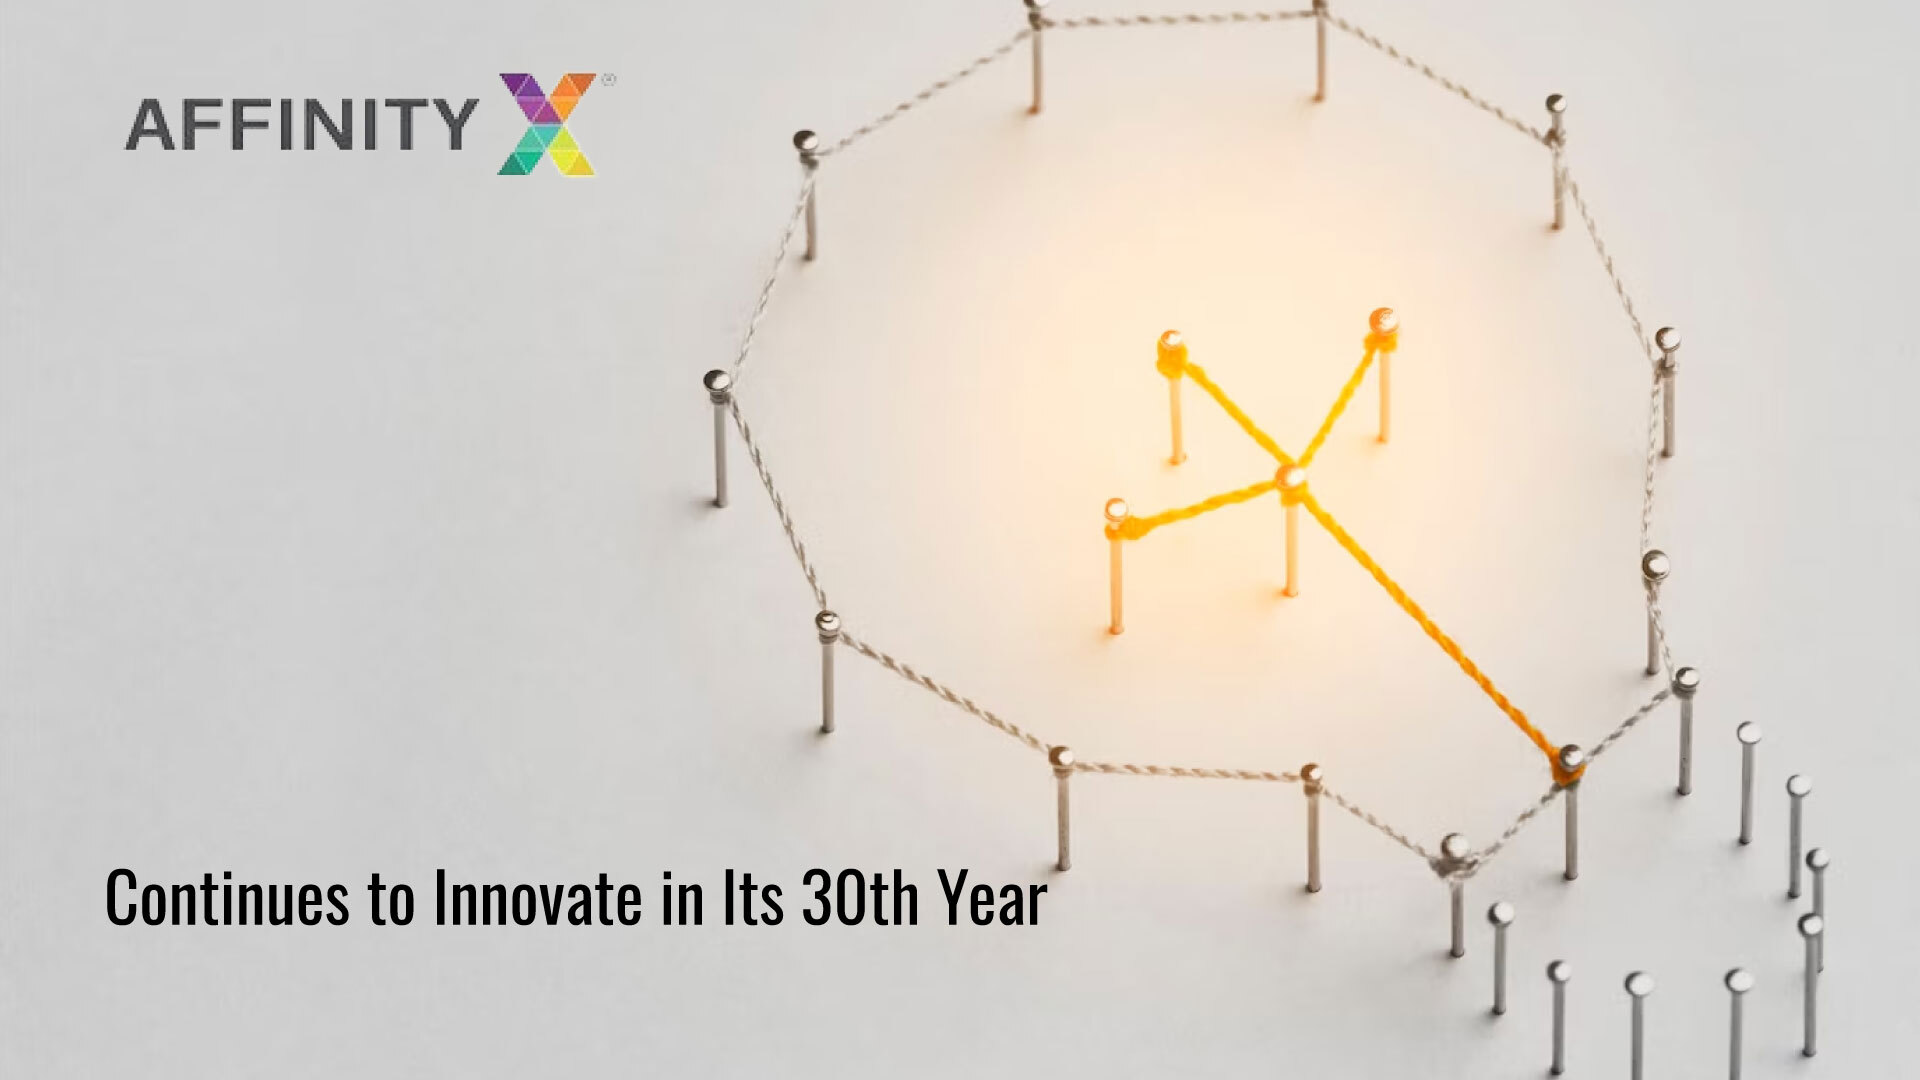 AFFINITYX CONTINUES TO INNOVATE IN ITS 30TH YEAR